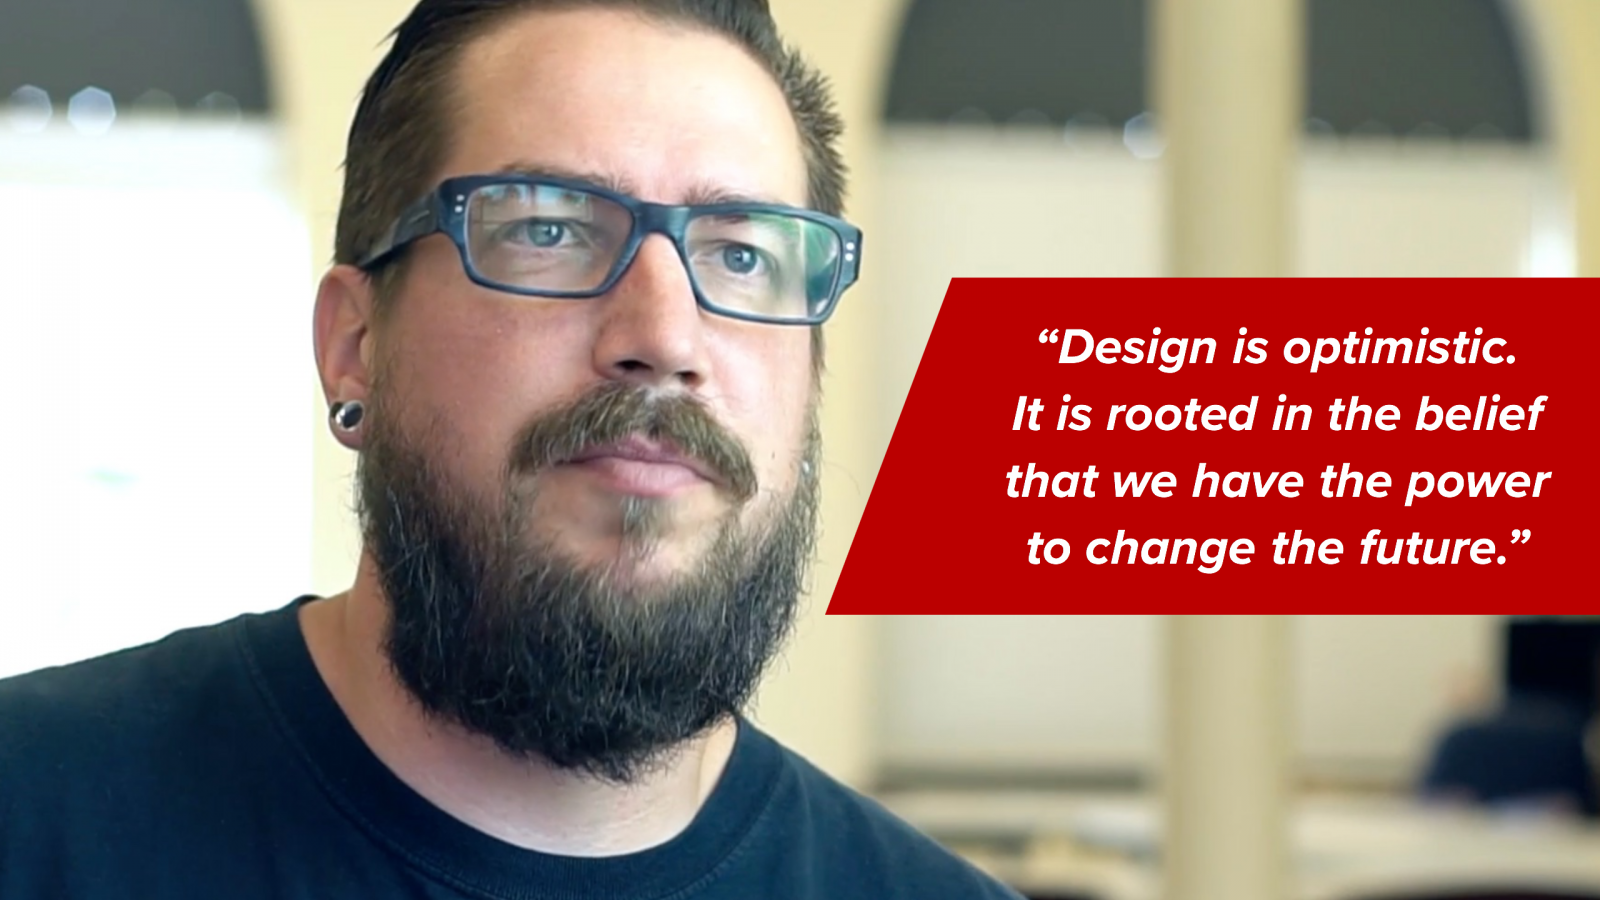 Gabe: "Design is optimistic. It is rooted in the belief that we have the power to change the future."